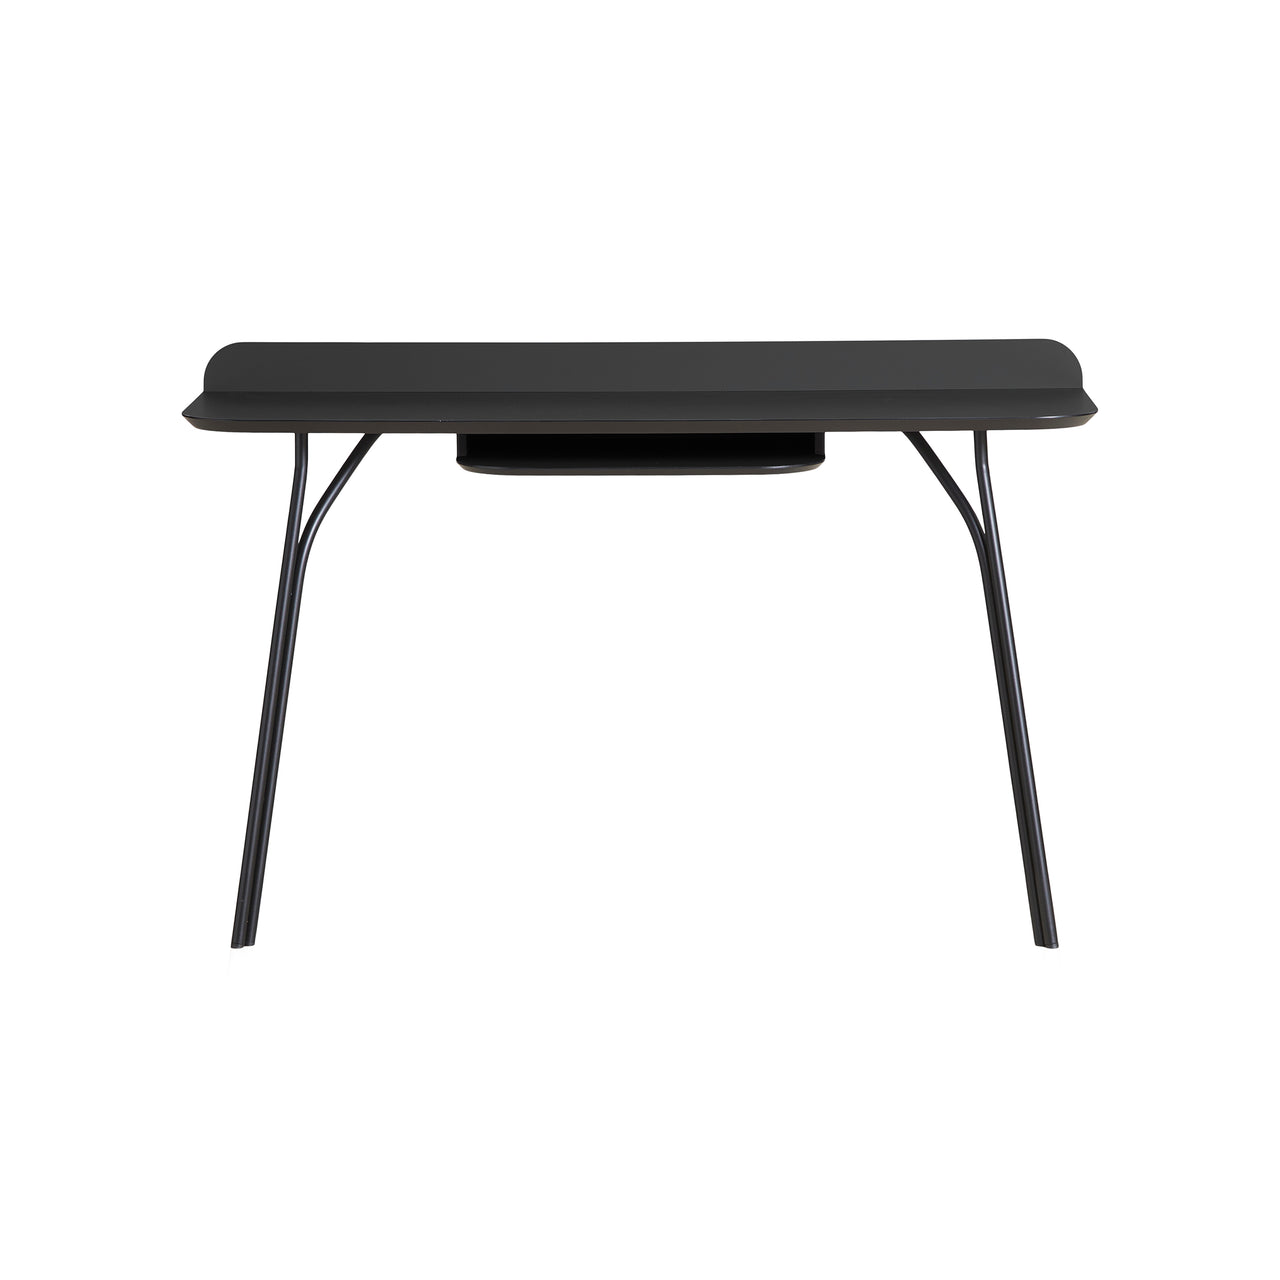 Tree Console Table: Low + Charcoal Black + With Shelf